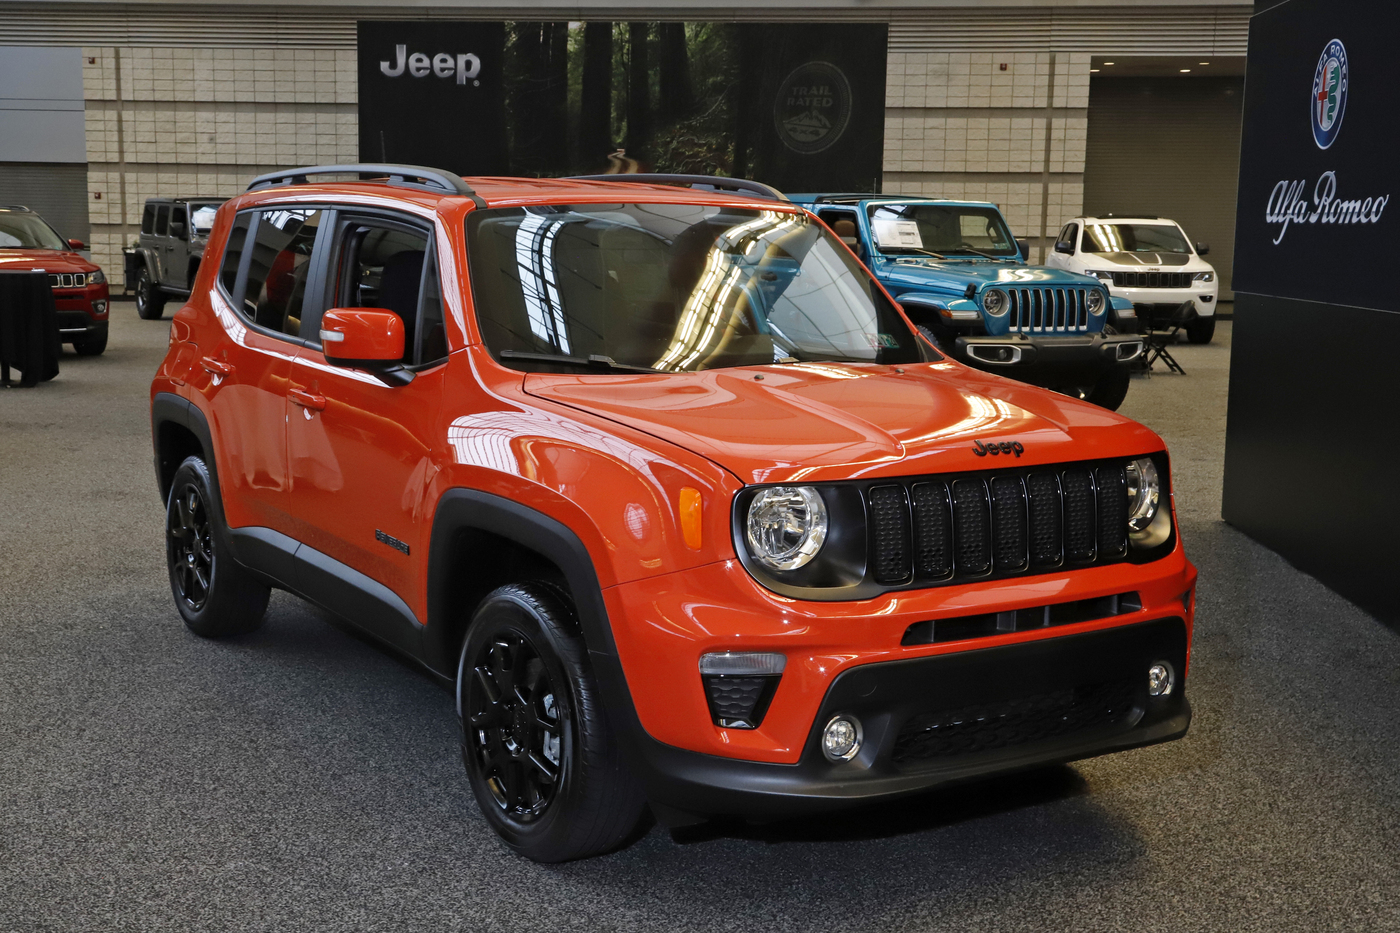 This is a 2020 Jeep Renegade Latitude 4x4 on display at the 2020 Pittsburgh International Auto Show Thursday, Feb.13, 2020 in Pittsburgh. (AP Photo/Gene J. Puskar)